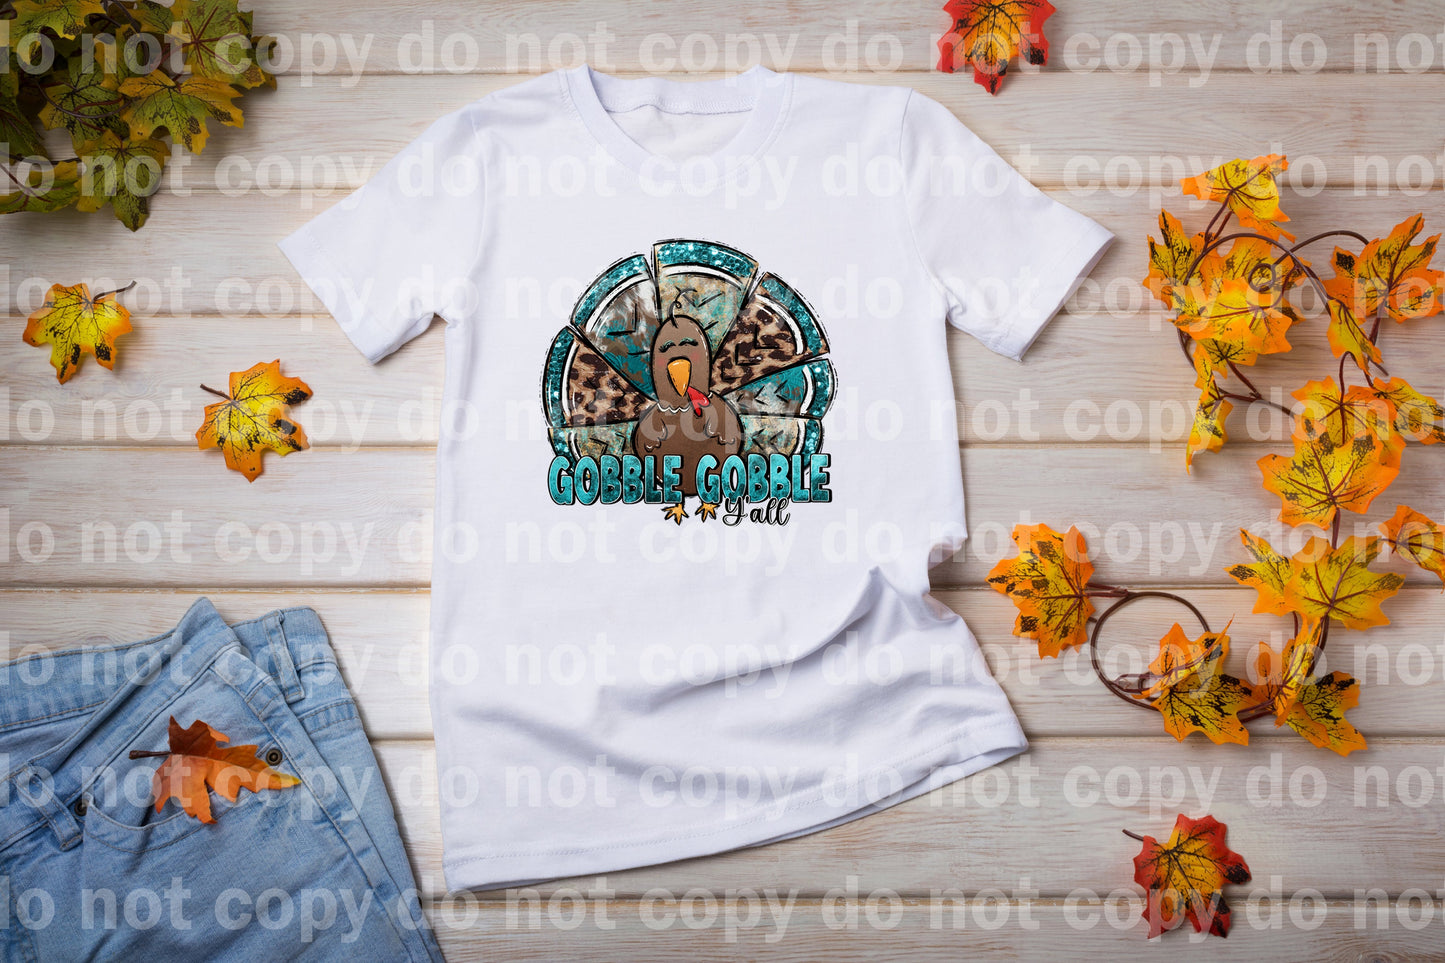 Gobble Gobble Y'all Dream Print or Sublimation Print